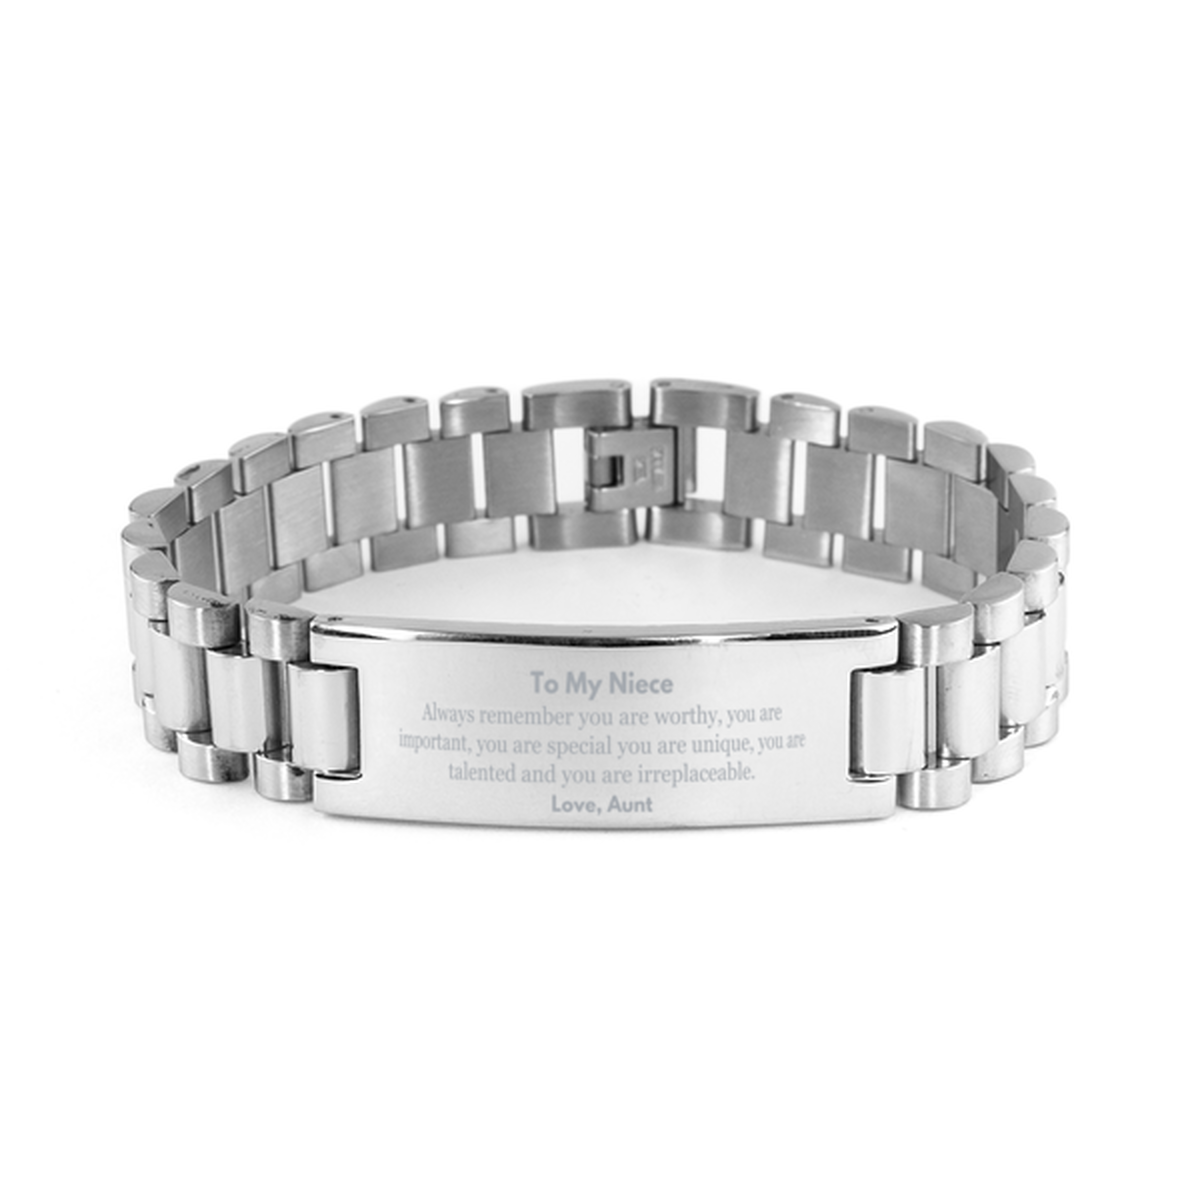 Niece Birthday Gifts from Aunt, Inspirational Ladder Stainless Steel Bracelet for Niece Christmas Graduation Gifts for Niece Always remember you are worthy, you are important. Love, Aunt